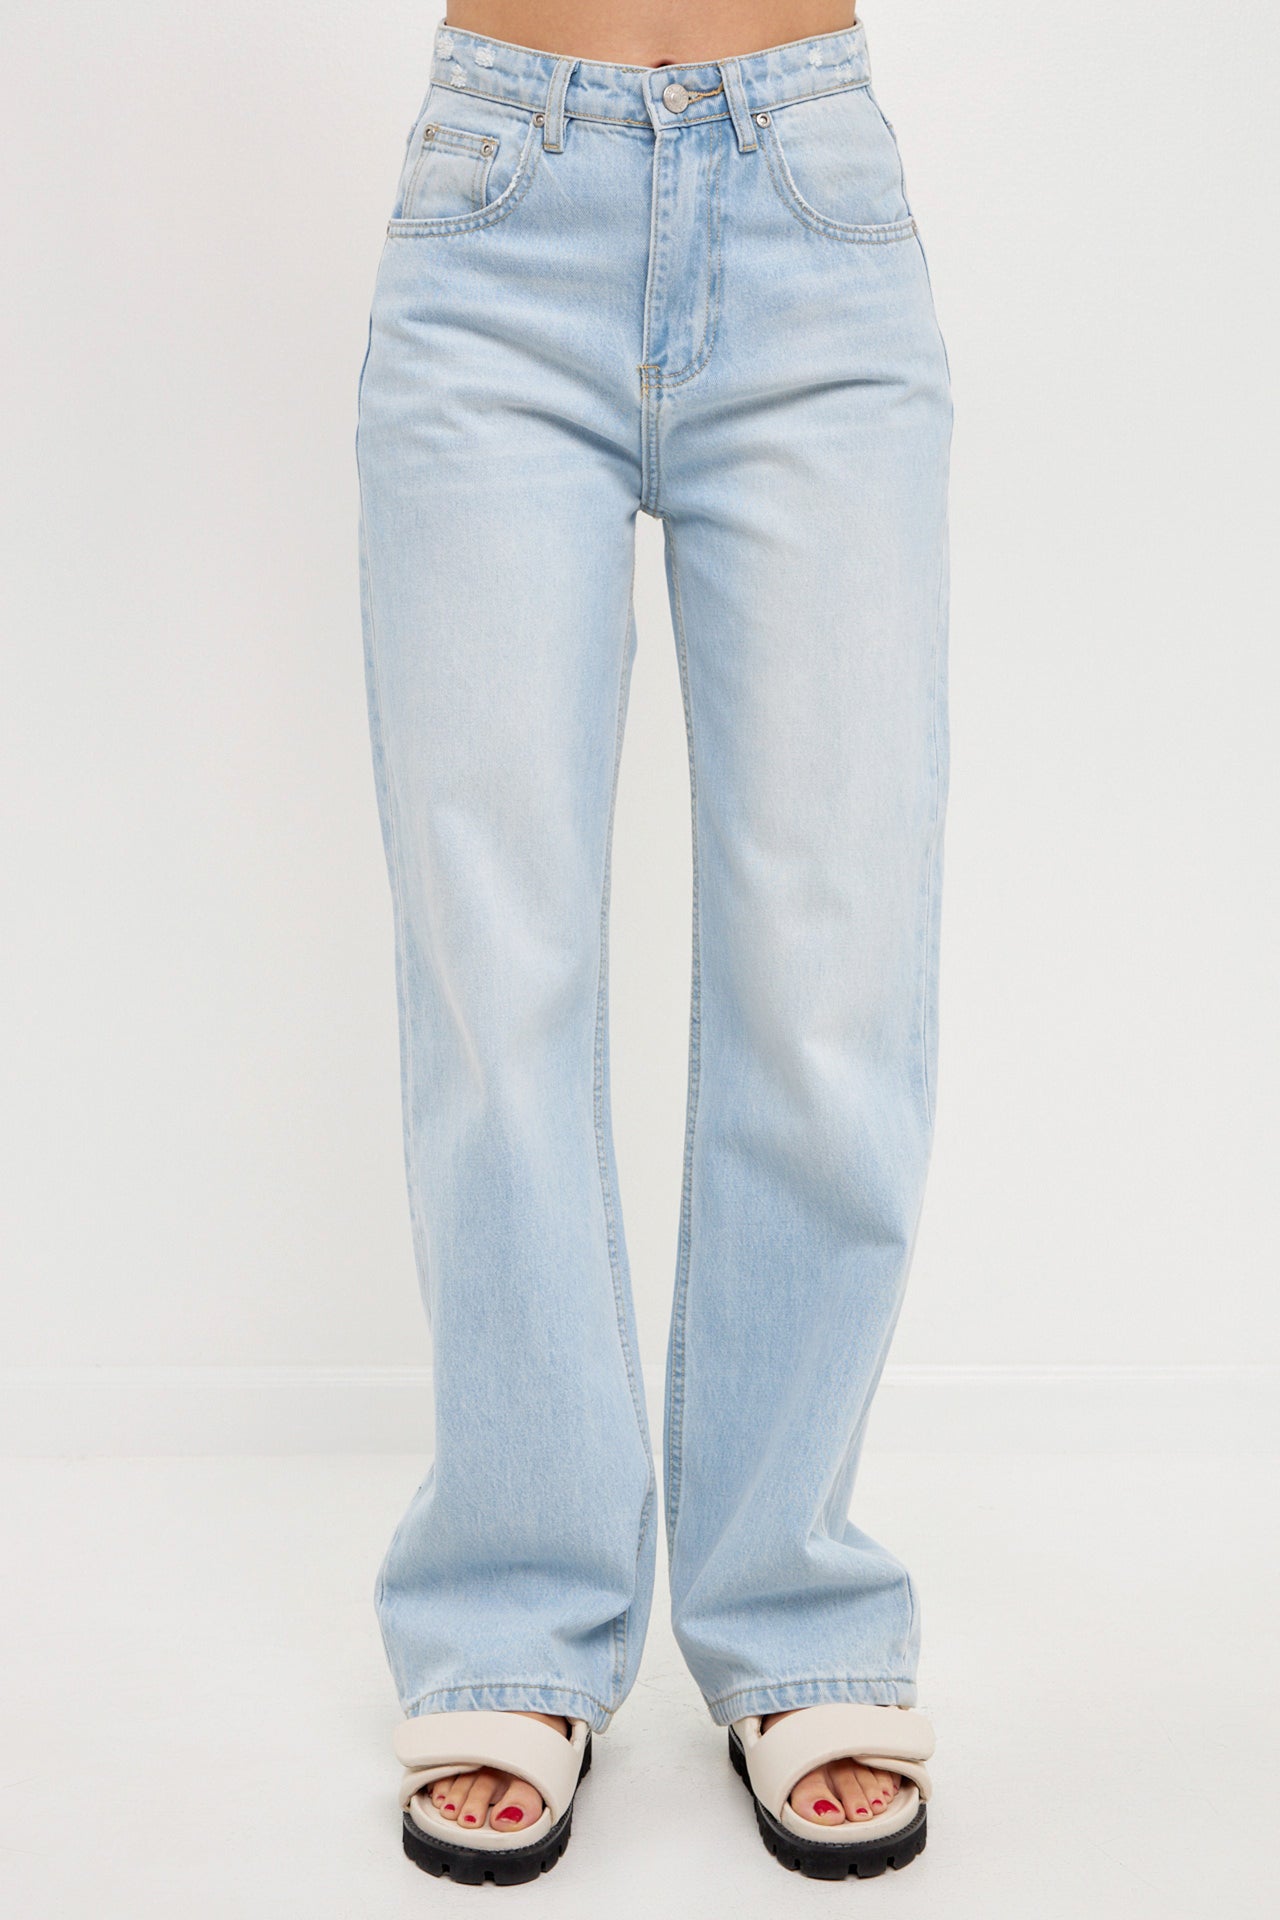 GREY LAB-High Waist Jeans-JEANS available at Objectrare